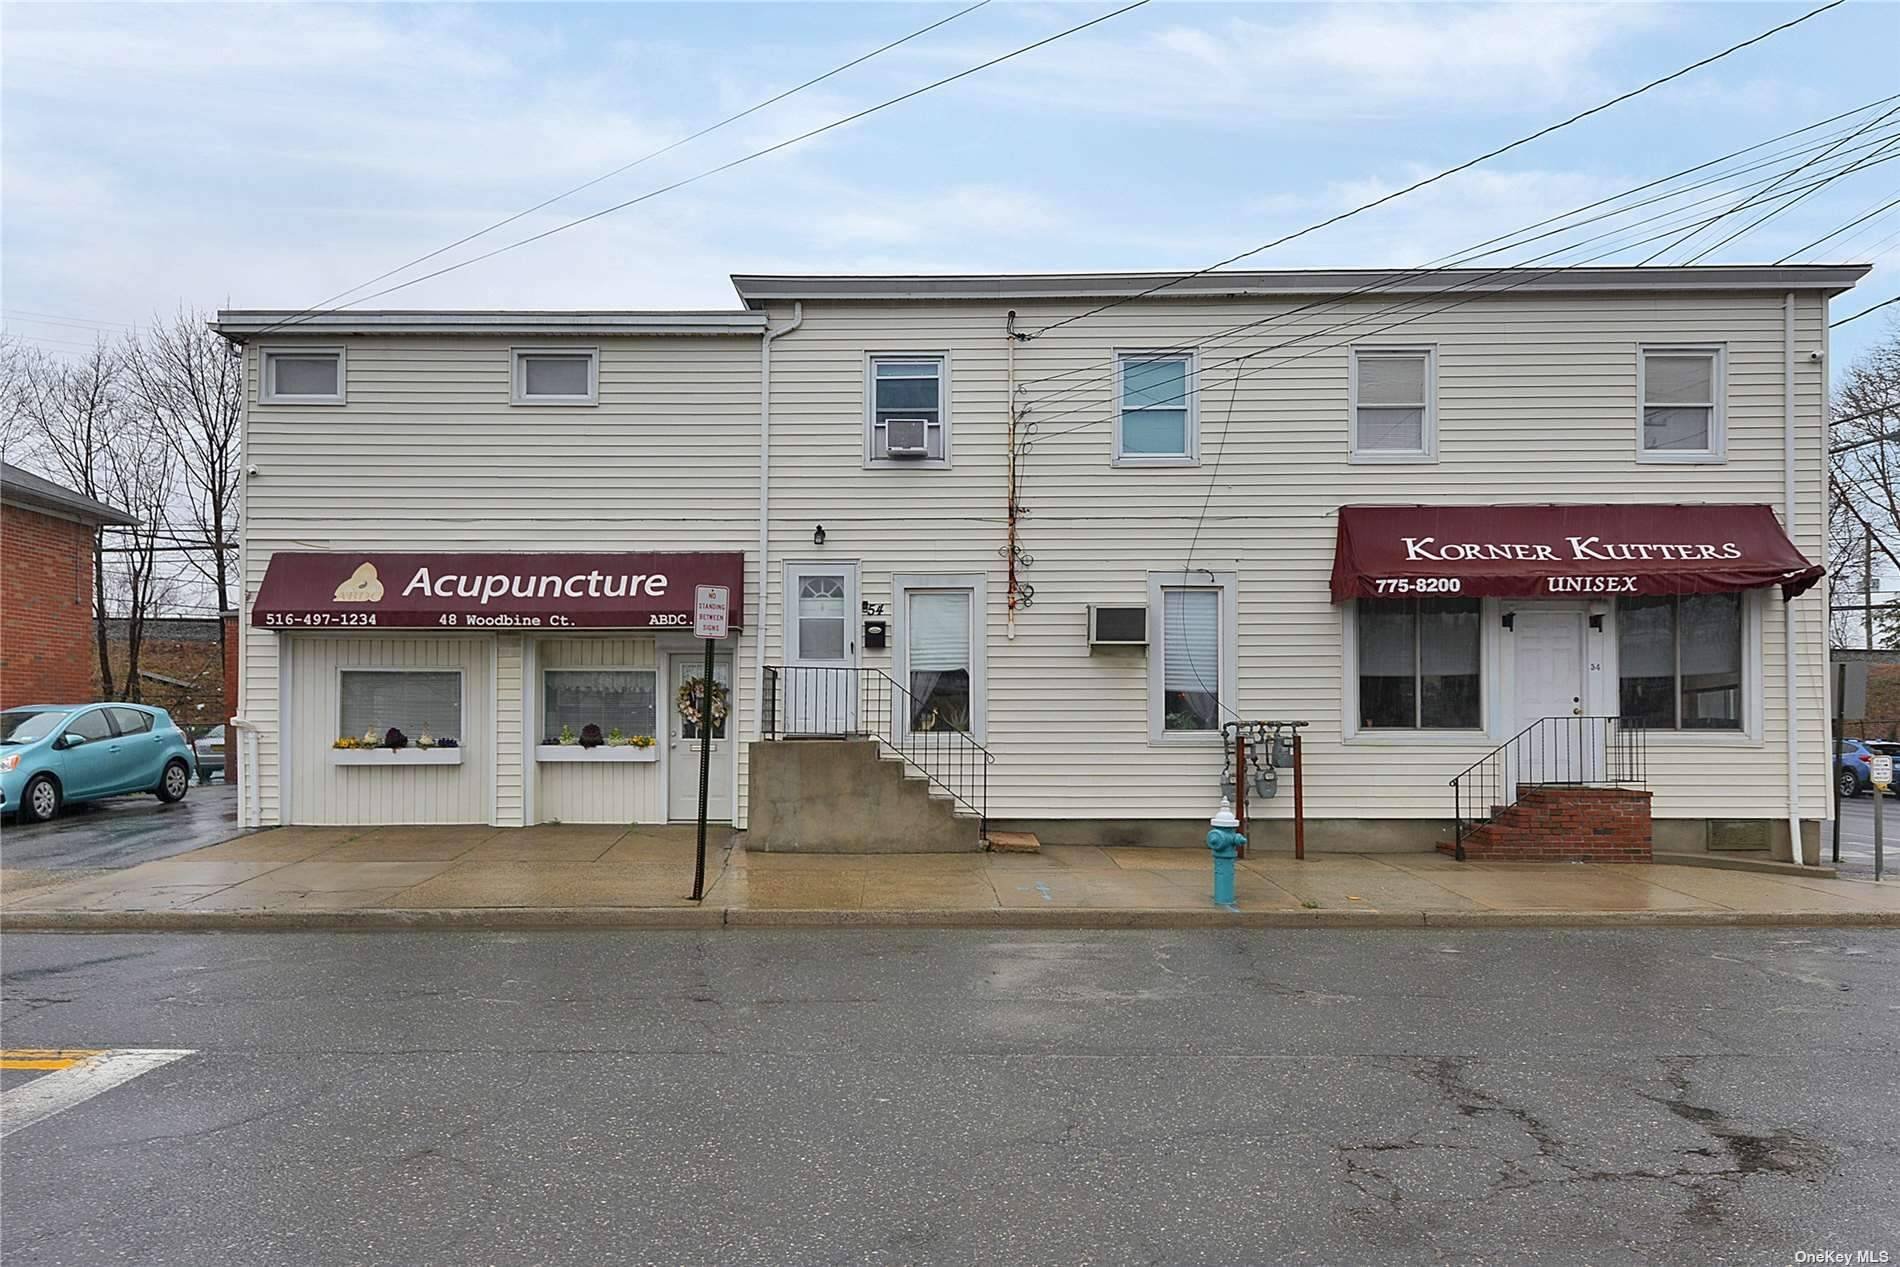 Just arrived fantastic investment opportunity in prime Floral Park Location.